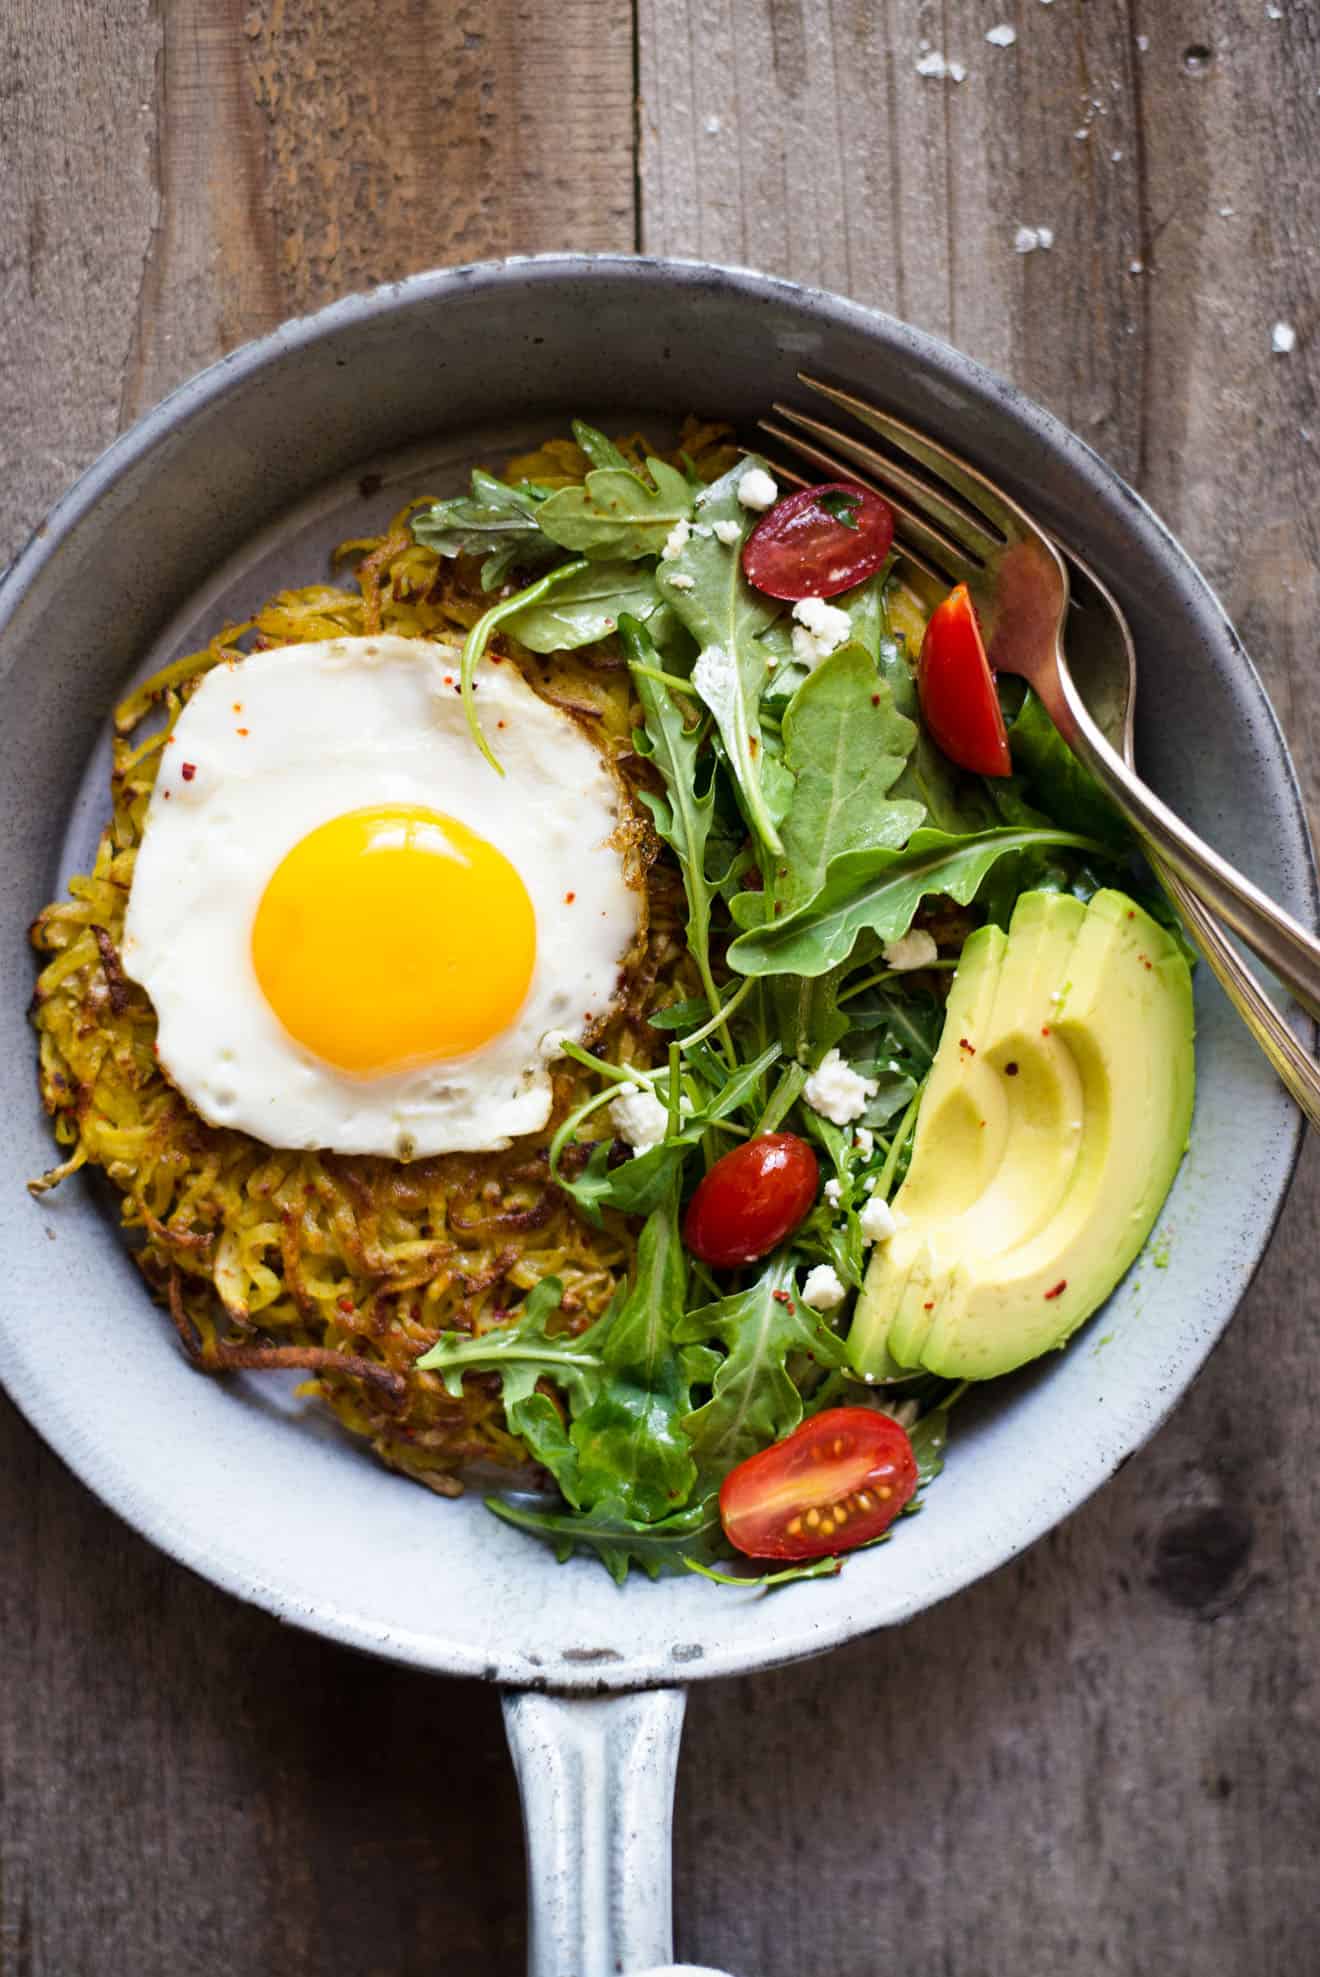 Curried Rosti - simple pan-fried potato pancake that's great as a healthy breakfast!